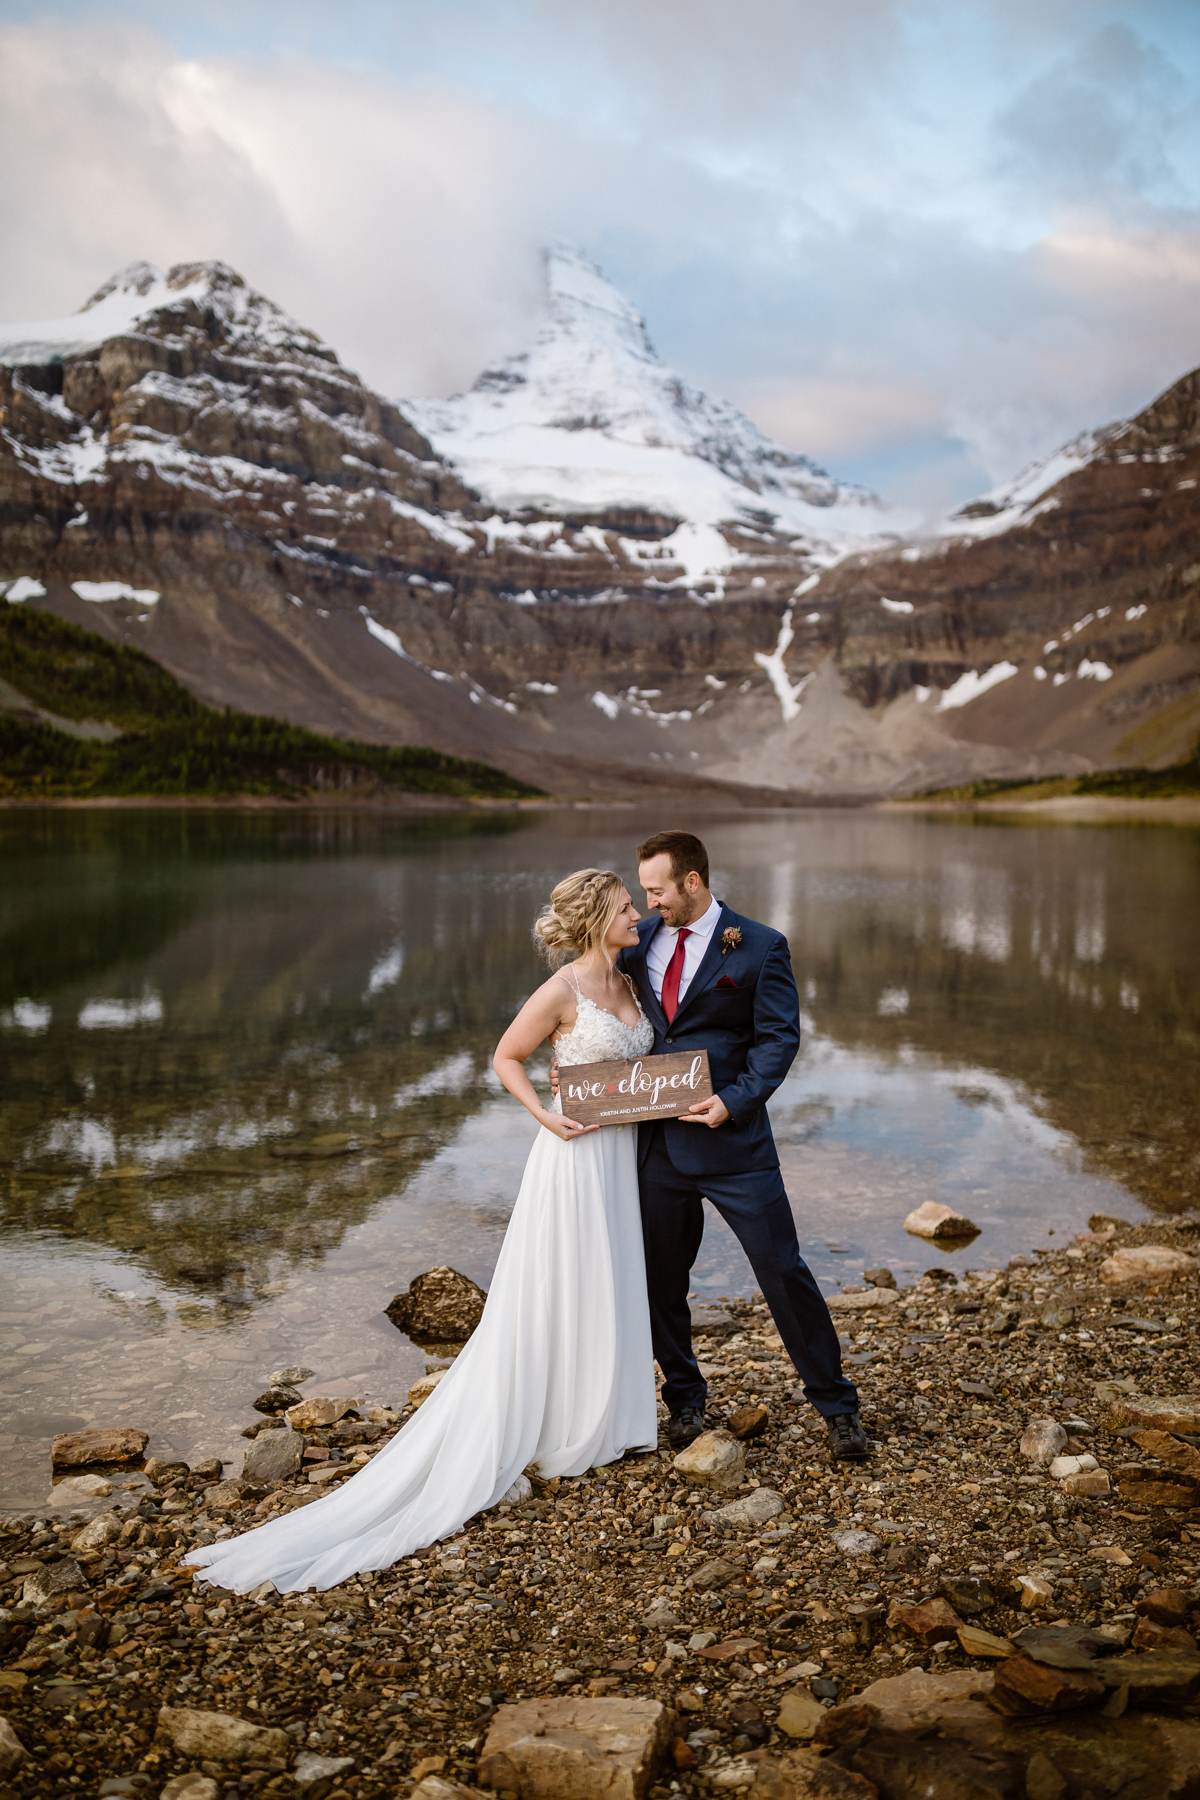 Mount Assiniboine Elopement Photographers at a Backcountry Lodge - Photo 56